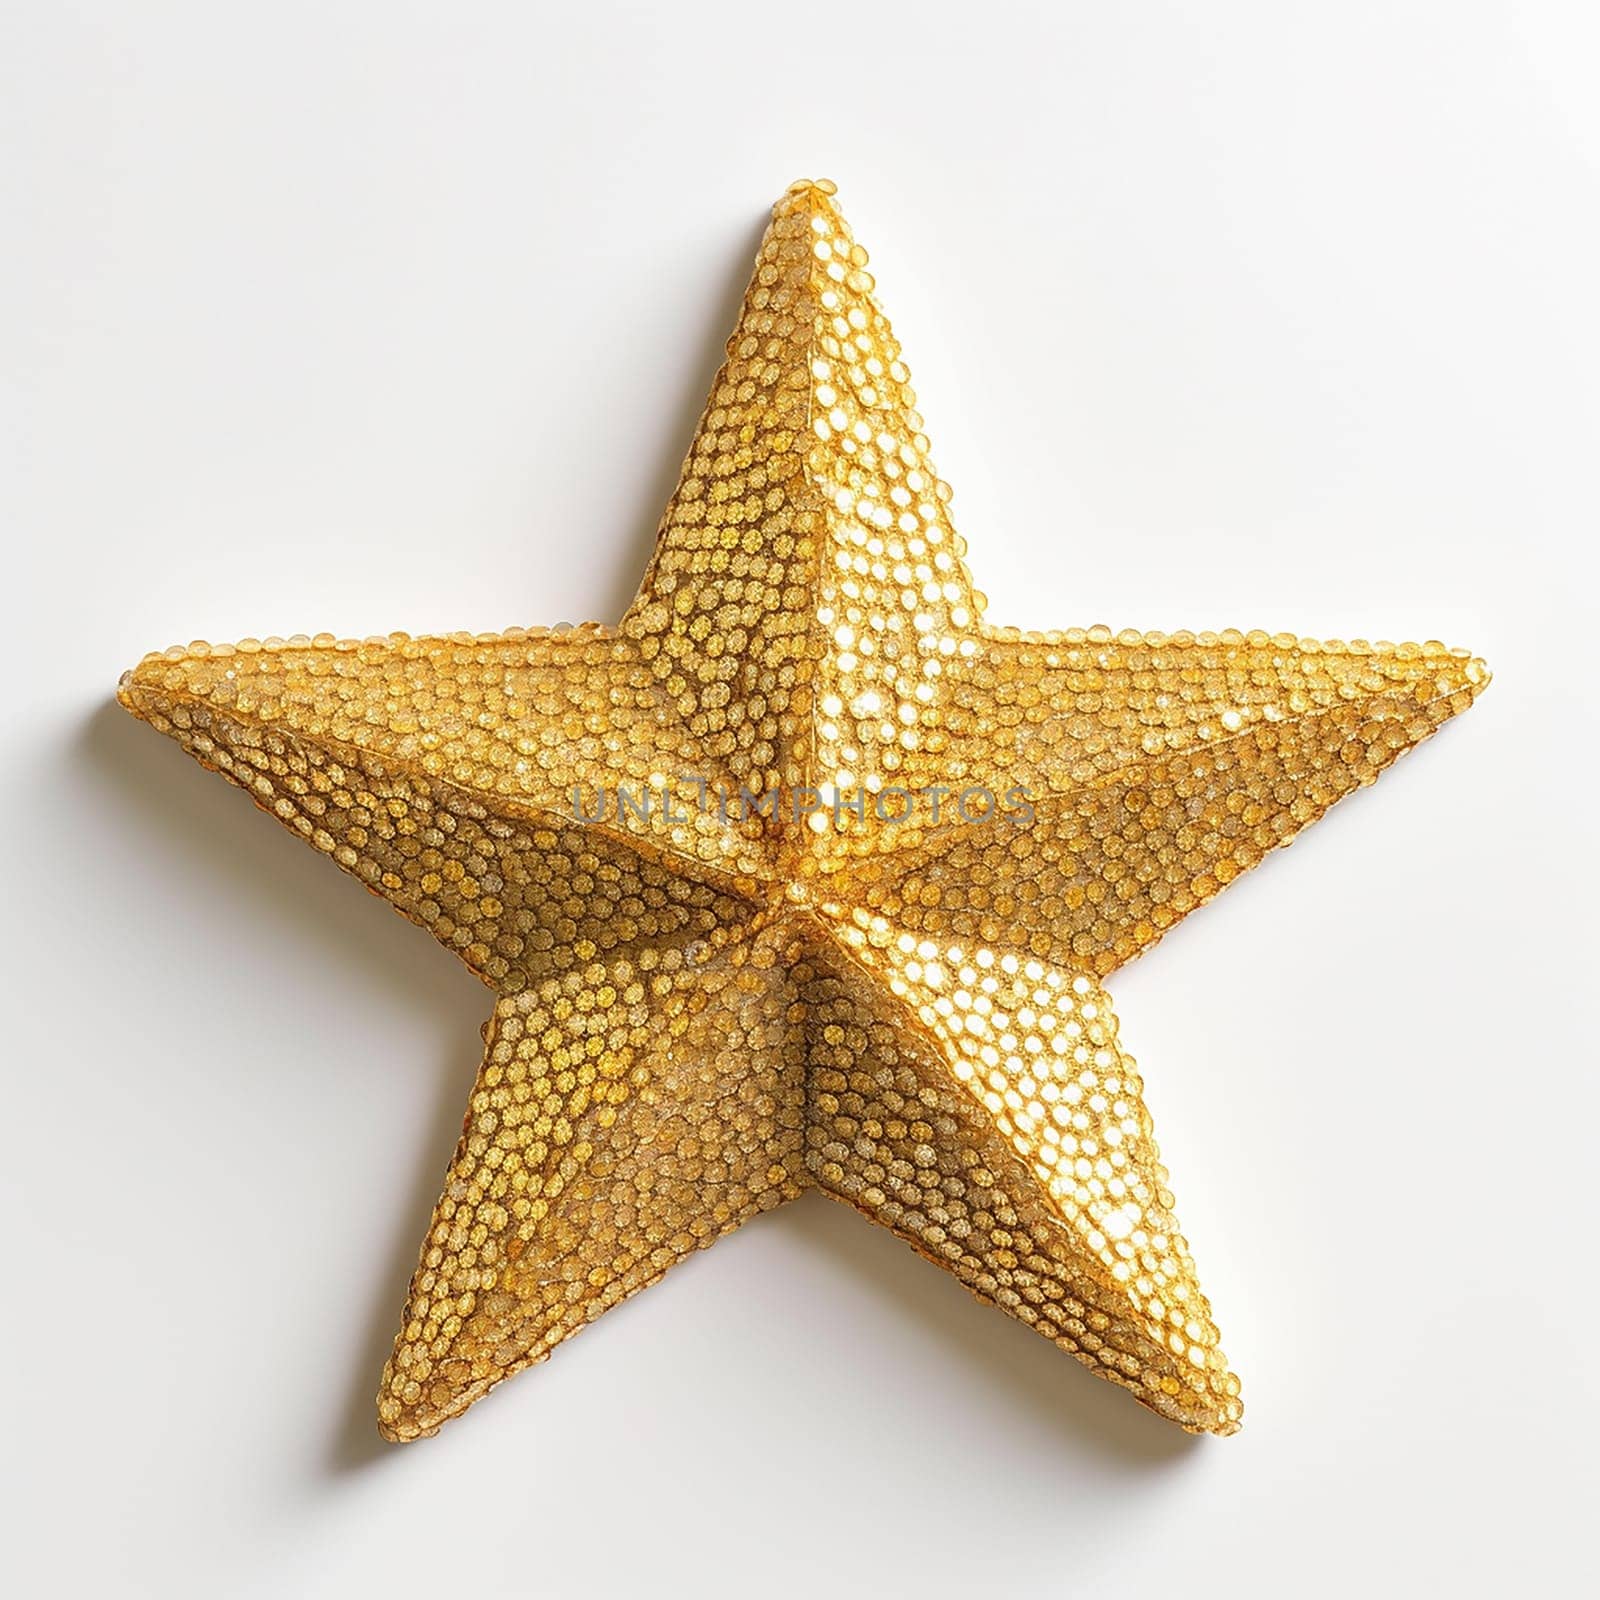 Golden starfish isolated on a white background, natural symmetry and texture. by Hype2art